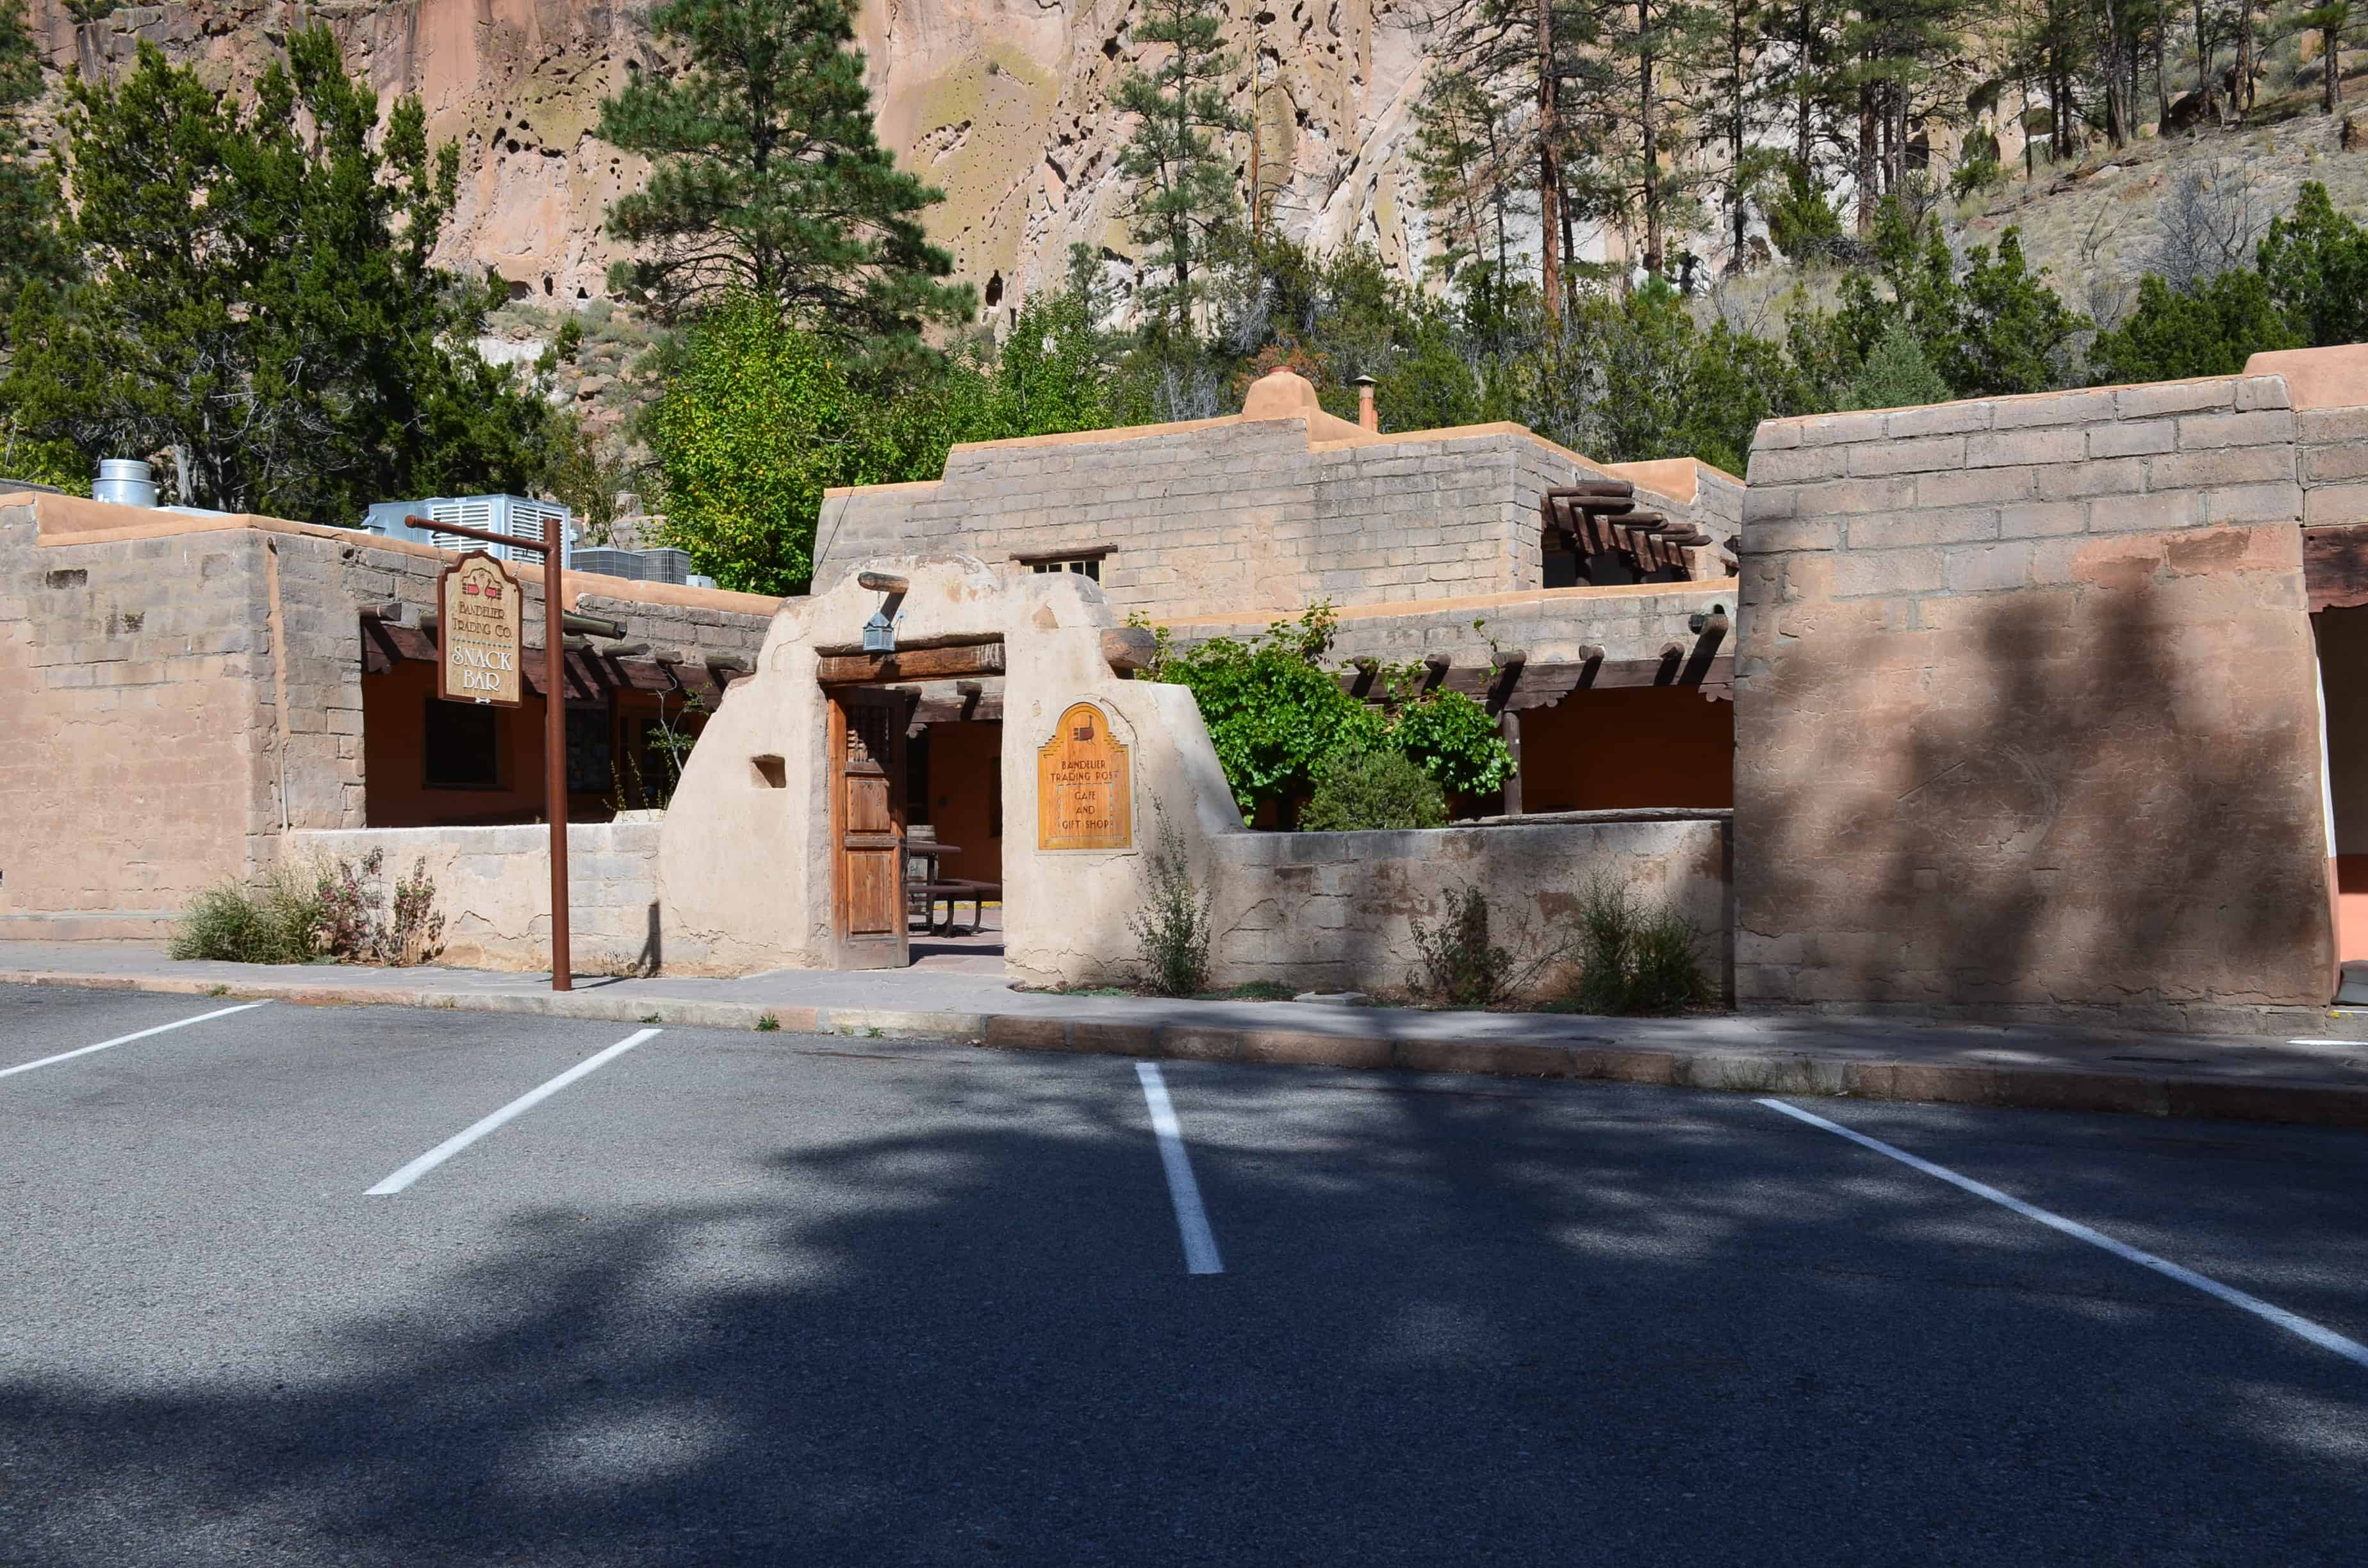 Bandelier Trading Post at Bandelier National Monument in New Mexico